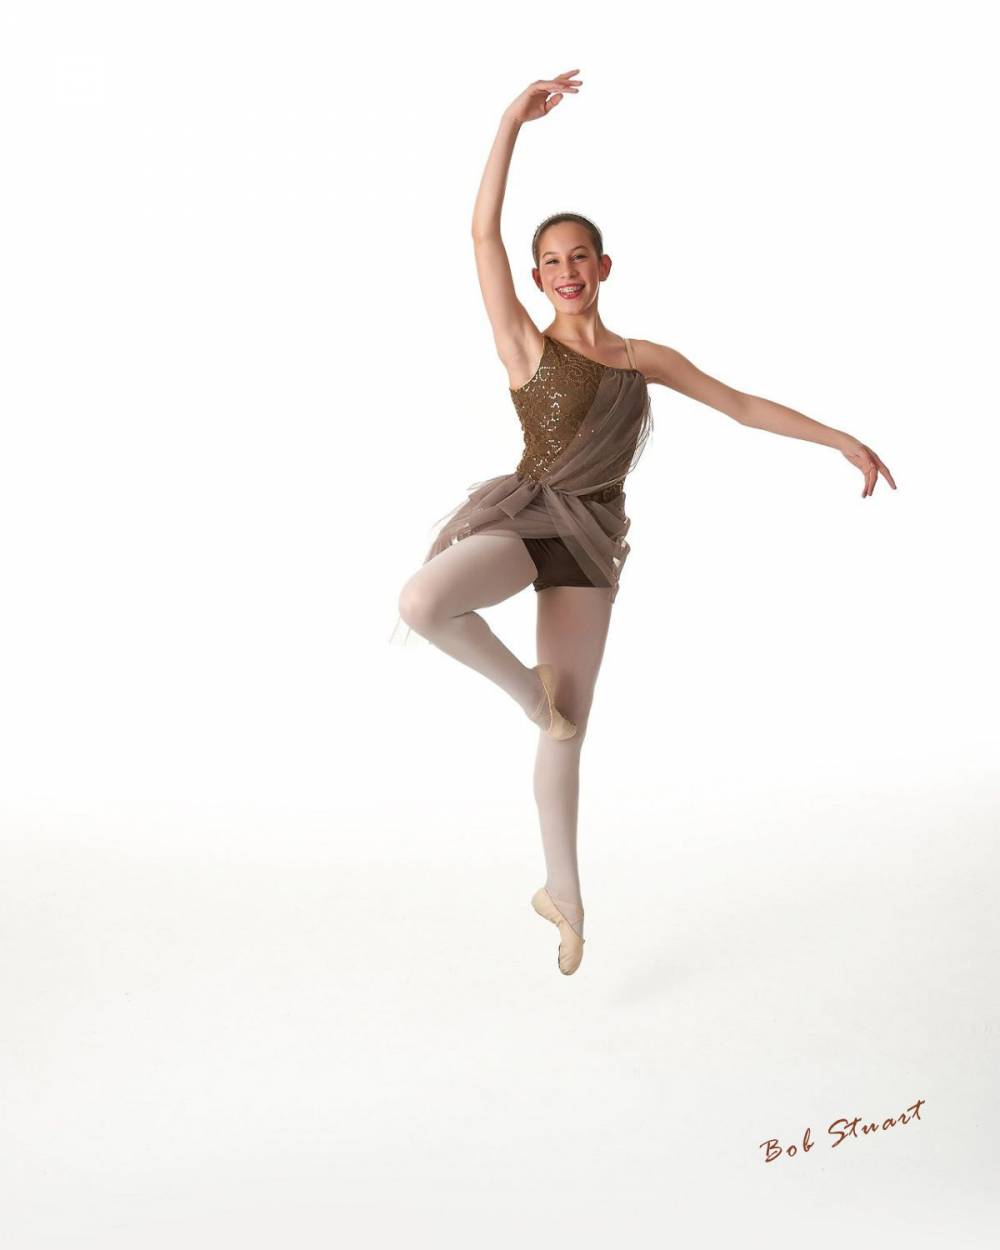 TOP NORTH CAROLINA PERFORMING ARTS CAMP: City Ballet Summer Dance is a Top Performing Arts Summer Camp located in Raleigh North Carolina offering many fun and enriching Performing Arts and other camp programs. 